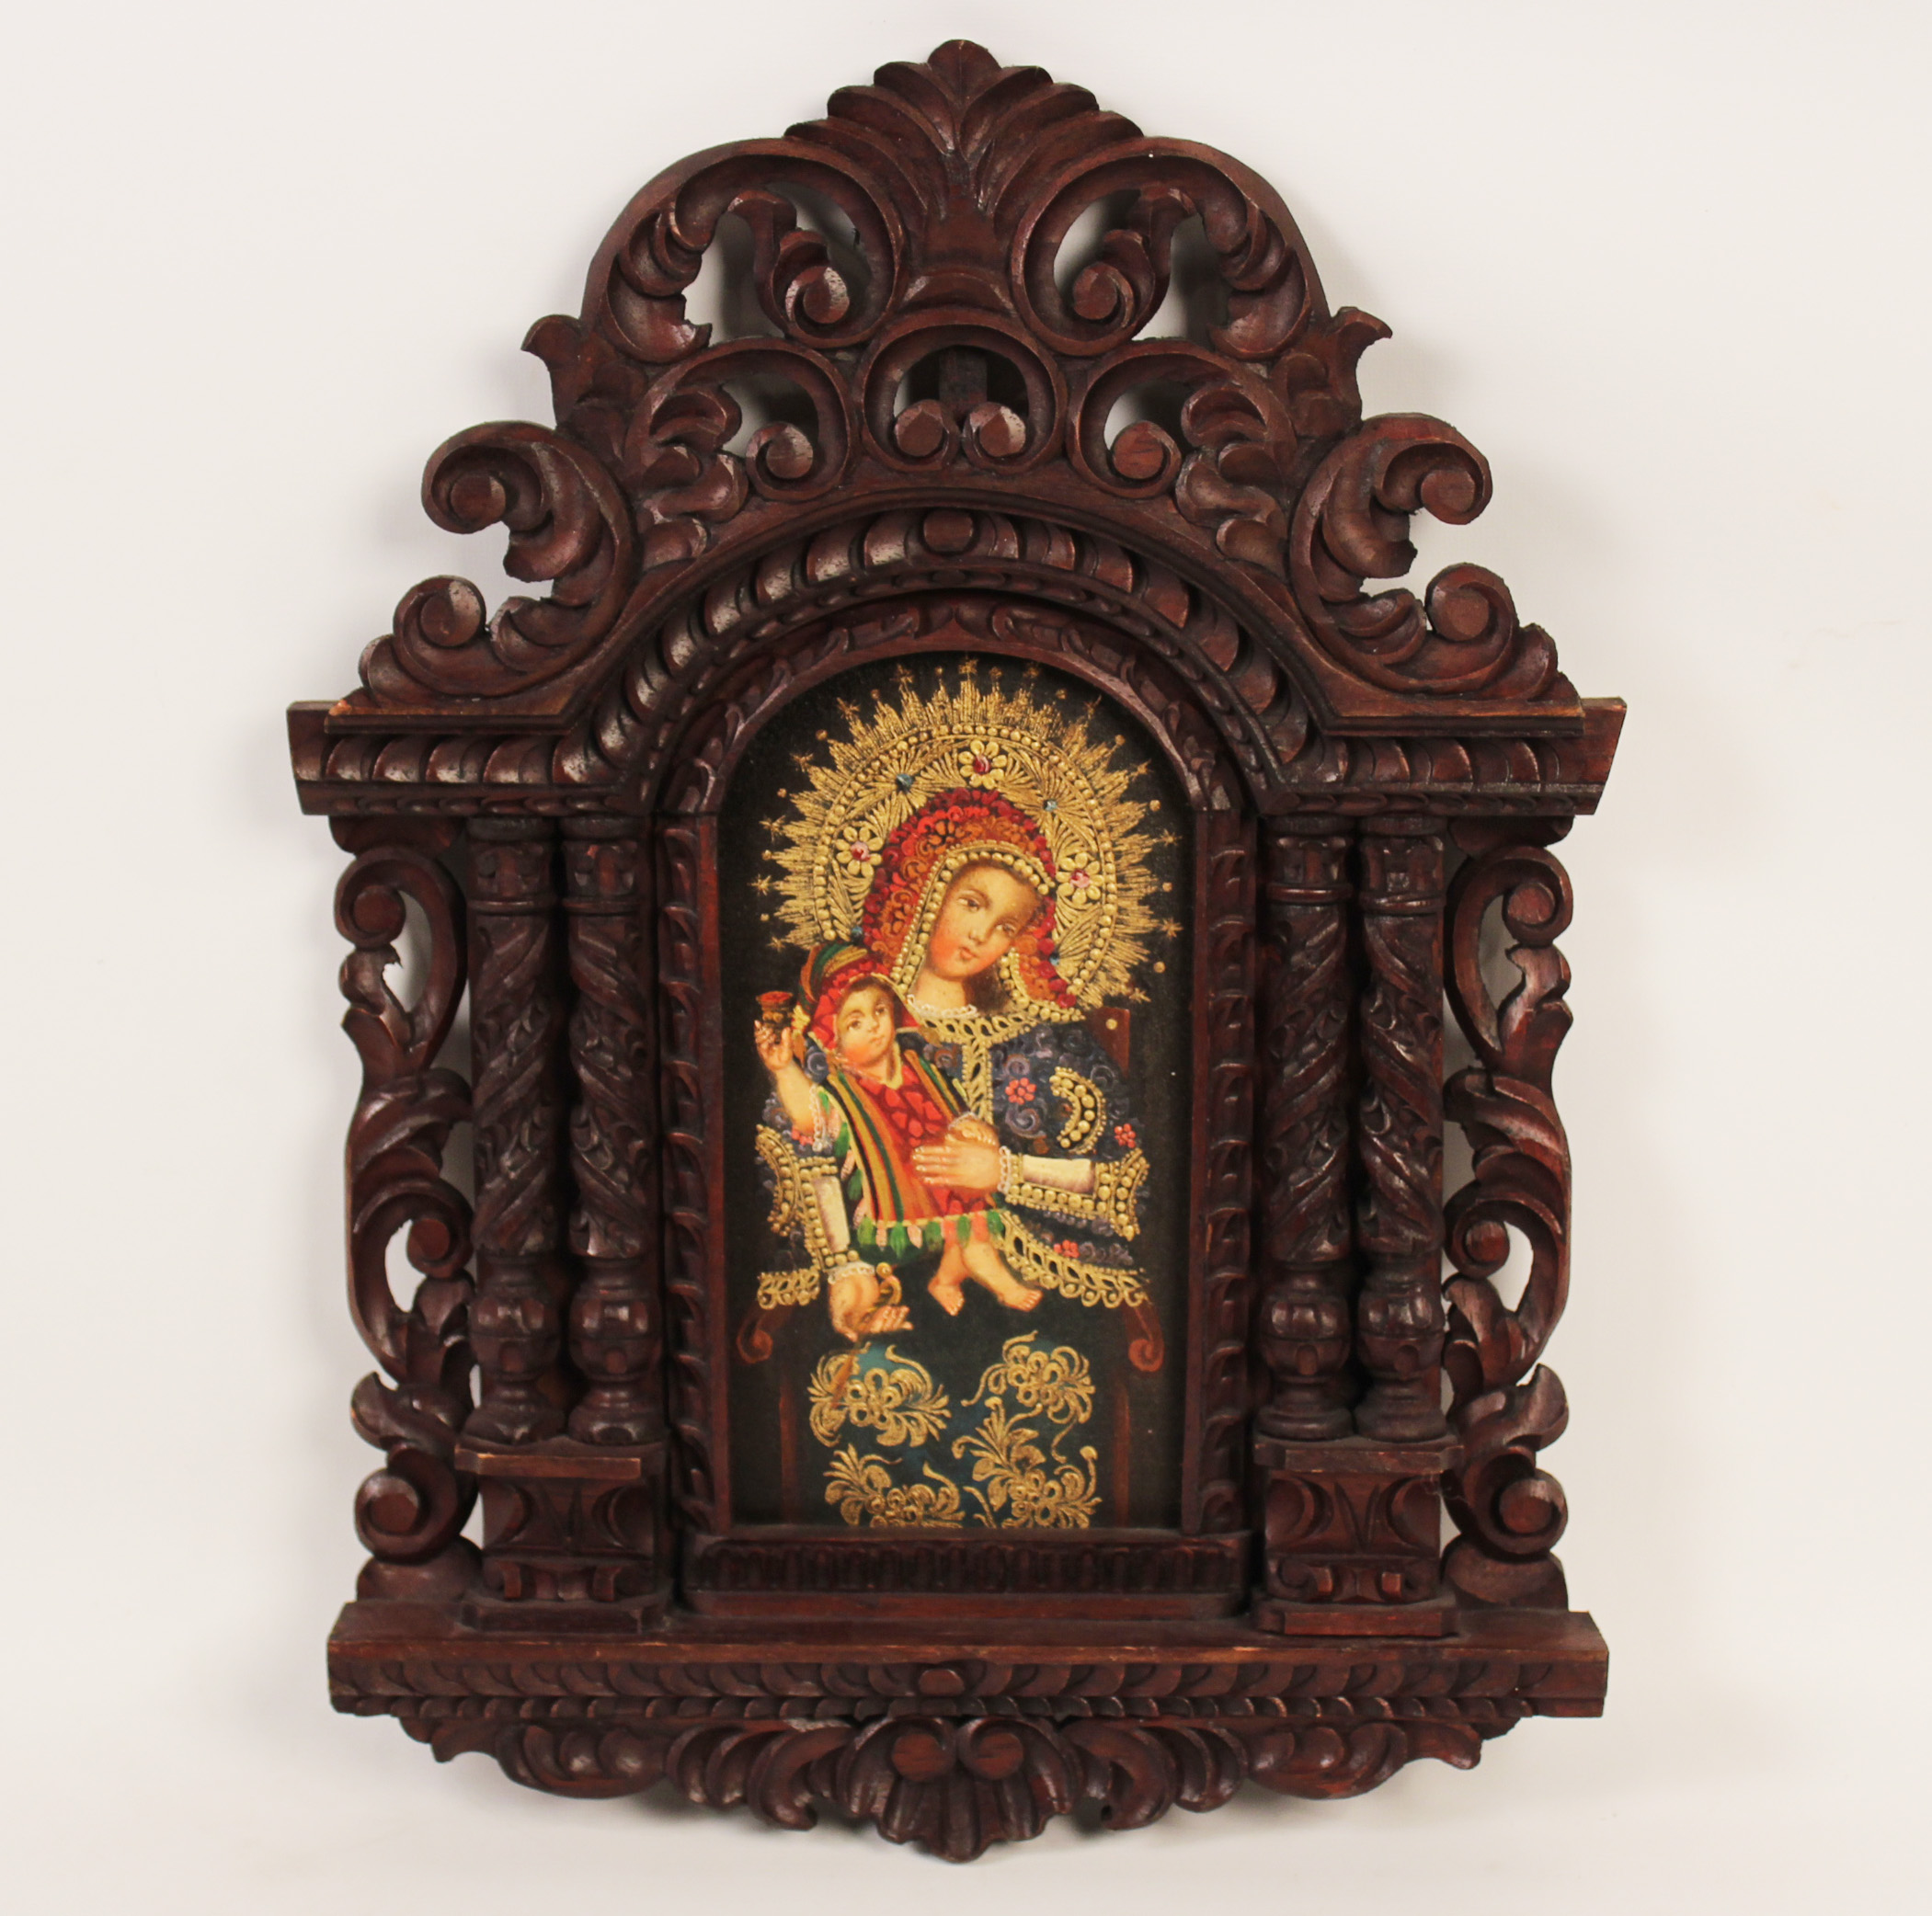 CARVED WALNUT TABERNACLE WITH PAINTING